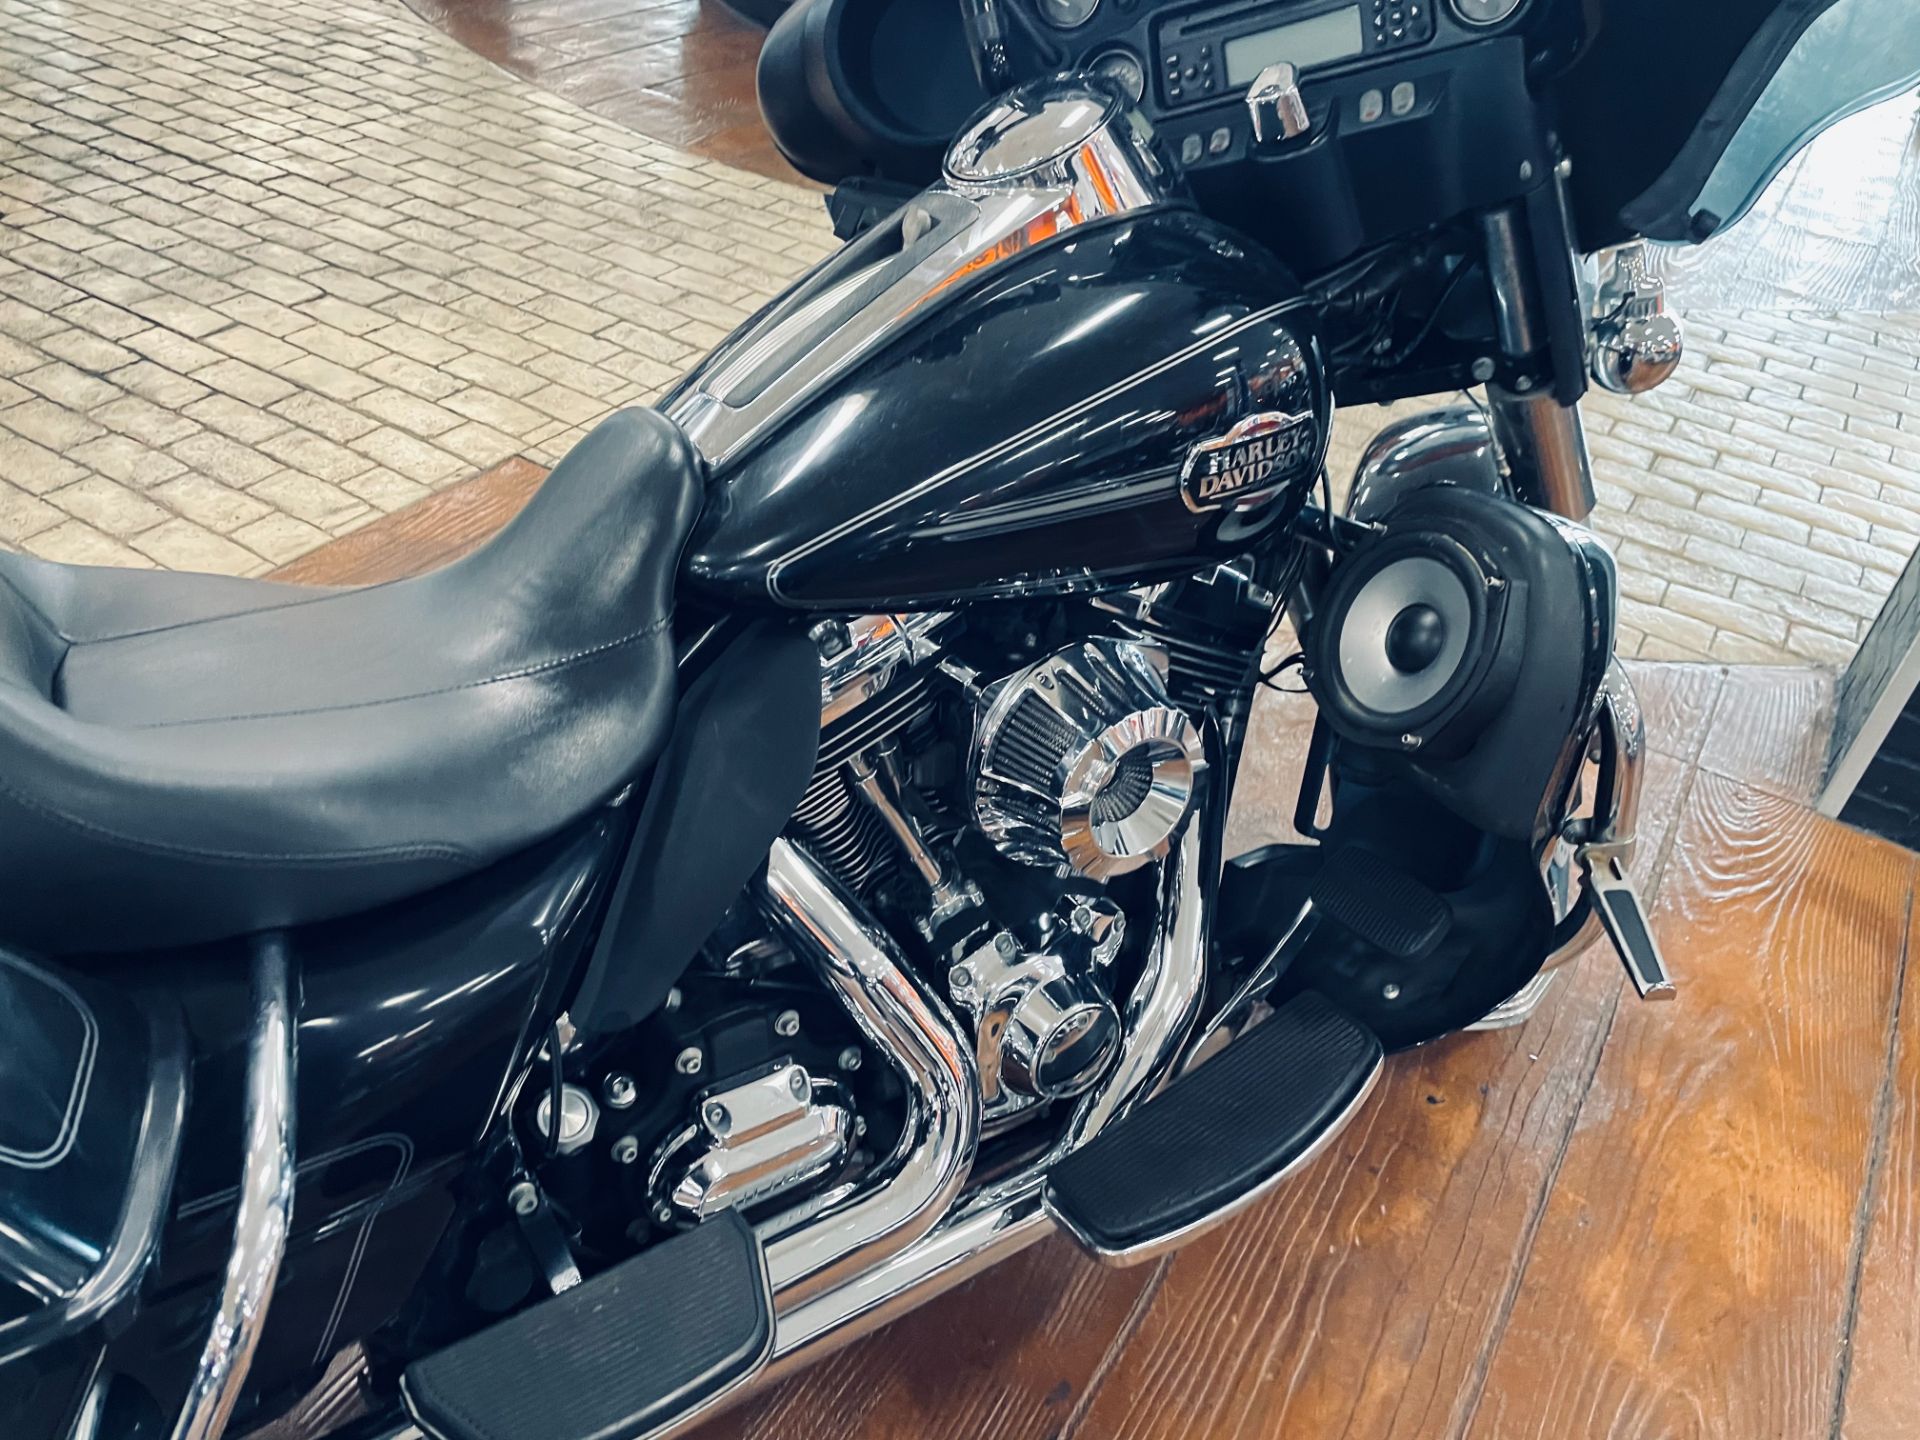 2018 Harley-Davidson Road King Special in Marion, Illinois - Photo 18